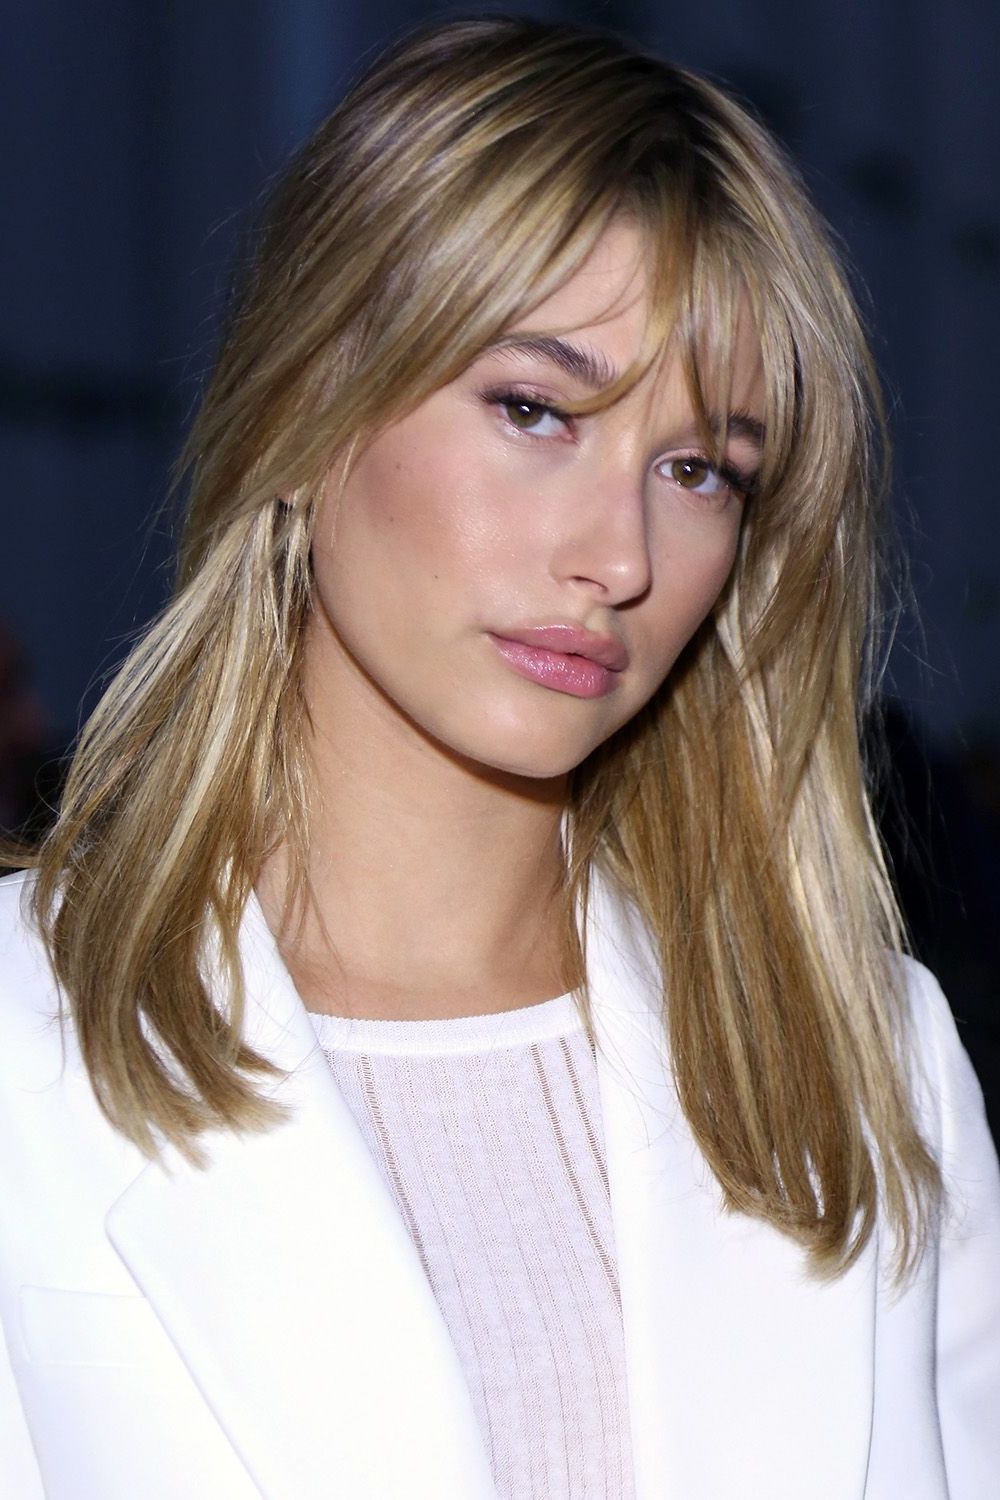 40 Best Medium Hairstyles – Celebrities With Shoulder Length Haircuts Intended For Current Medium Hairstyles For Spring (View 11 of 20)